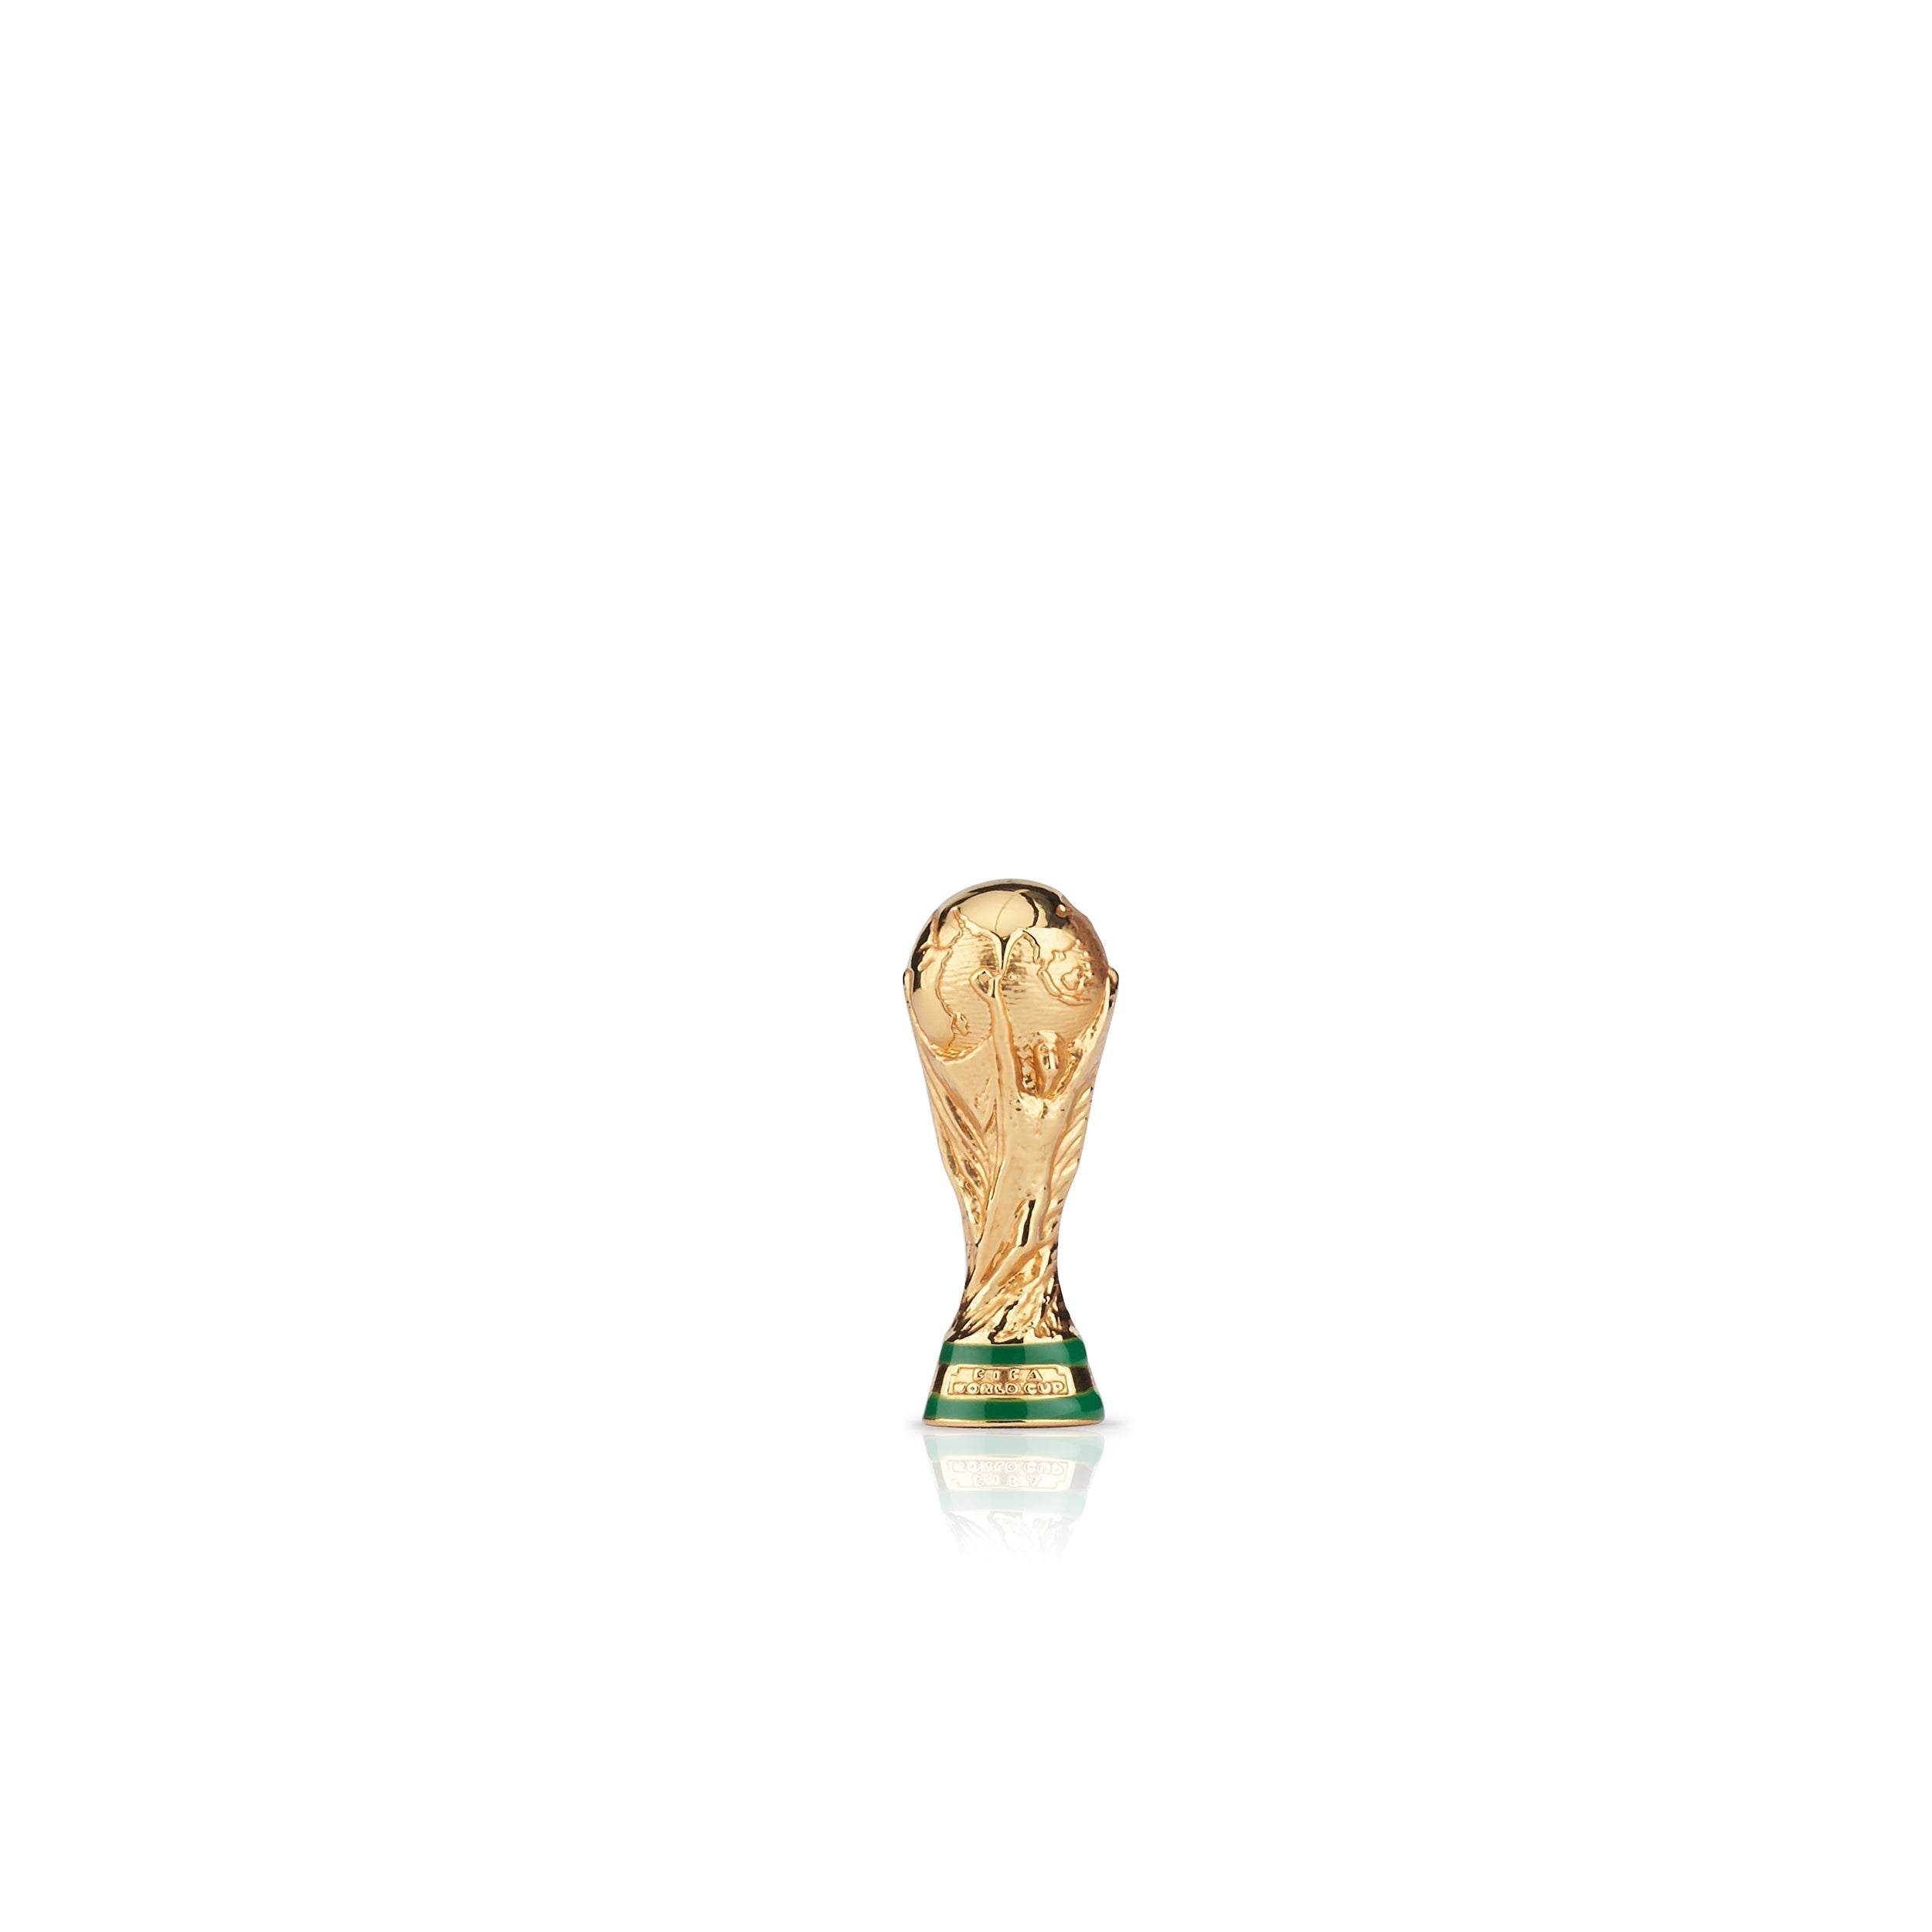  VENDOS 2022 World Cup Trophy The World Cup Football